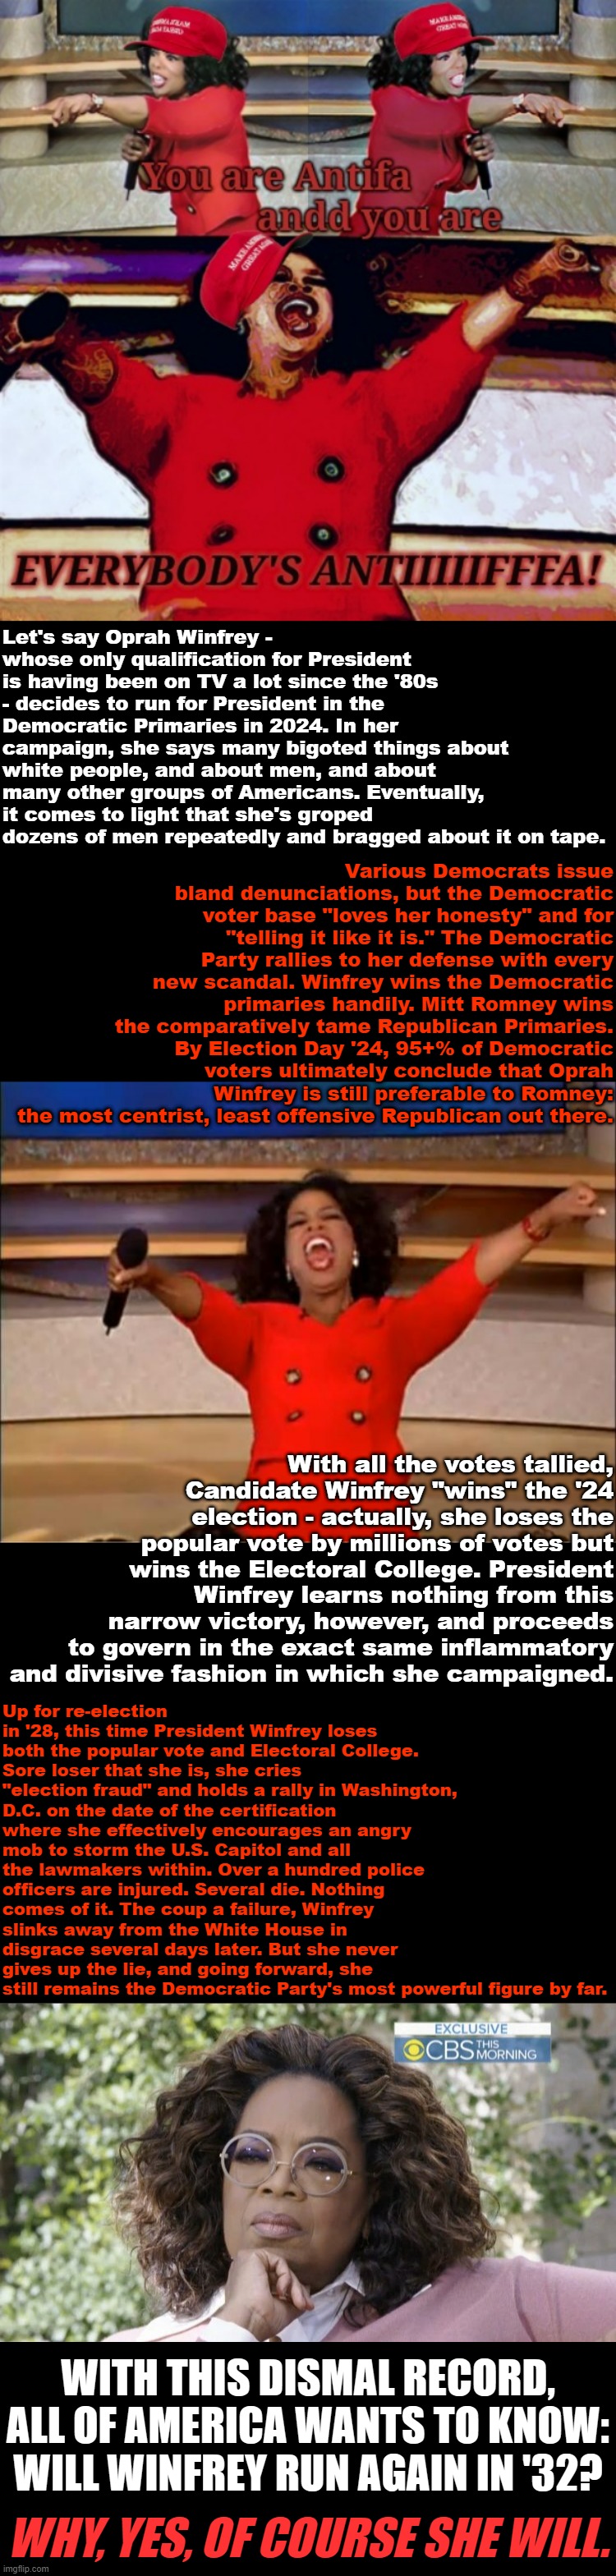 How Oprah Winfrey took over the Democratic Party: A political fantasia. | Let's say Oprah Winfrey - whose only qualification for President is having been on TV a lot since the '80s - decides to run for President in the Democratic Primaries in 2024. In her campaign, she says many bigoted things about white people, and about men, and about many other groups of Americans. Eventually, it comes to light that she's groped dozens of men repeatedly and bragged about it on tape. Various Democrats issue bland denunciations, but the Democratic voter base "loves her honesty" and for "telling it like it is." The Democratic Party rallies to her defense with every new scandal. Winfrey wins the Democratic primaries handily. Mitt Romney wins the comparatively tame Republican Primaries. By Election Day '24, 95+% of Democratic voters ultimately conclude that Oprah Winfrey is still preferable to Romney: the most centrist, least offensive Republican out there. With all the votes tallied, Candidate Winfrey "wins" the '24 election - actually, she loses the popular vote by millions of votes but wins the Electoral College. President Winfrey learns nothing from this narrow victory, however, and proceeds to govern in the exact same inflammatory and divisive fashion in which she campaigned. Up for re-election in '28, this time President Winfrey loses both the popular vote and Electoral College. Sore loser that she is, she cries "election fraud" and holds a rally in Washington, D.C. on the date of the certification where she effectively encourages an angry mob to storm the U.S. Capitol and all the lawmakers within. Over a hundred police officers are injured. Several die. Nothing comes of it. The coup a failure, Winfrey slinks away from the White House in disgrace several days later. But she never gives up the lie, and going forward, she still remains the Democratic Party's most powerful figure by far. WITH THIS DISMAL RECORD, ALL OF AMERICA WANTS TO KNOW: WILL WINFREY RUN AGAIN IN '32? WHY, YES, OF COURSE SHE WILL. | image tagged in maga oprah winfrey everybody's antifa,memes,oprah you get a,thinking oprah winfrey,republicans,trump is a moron | made w/ Imgflip meme maker